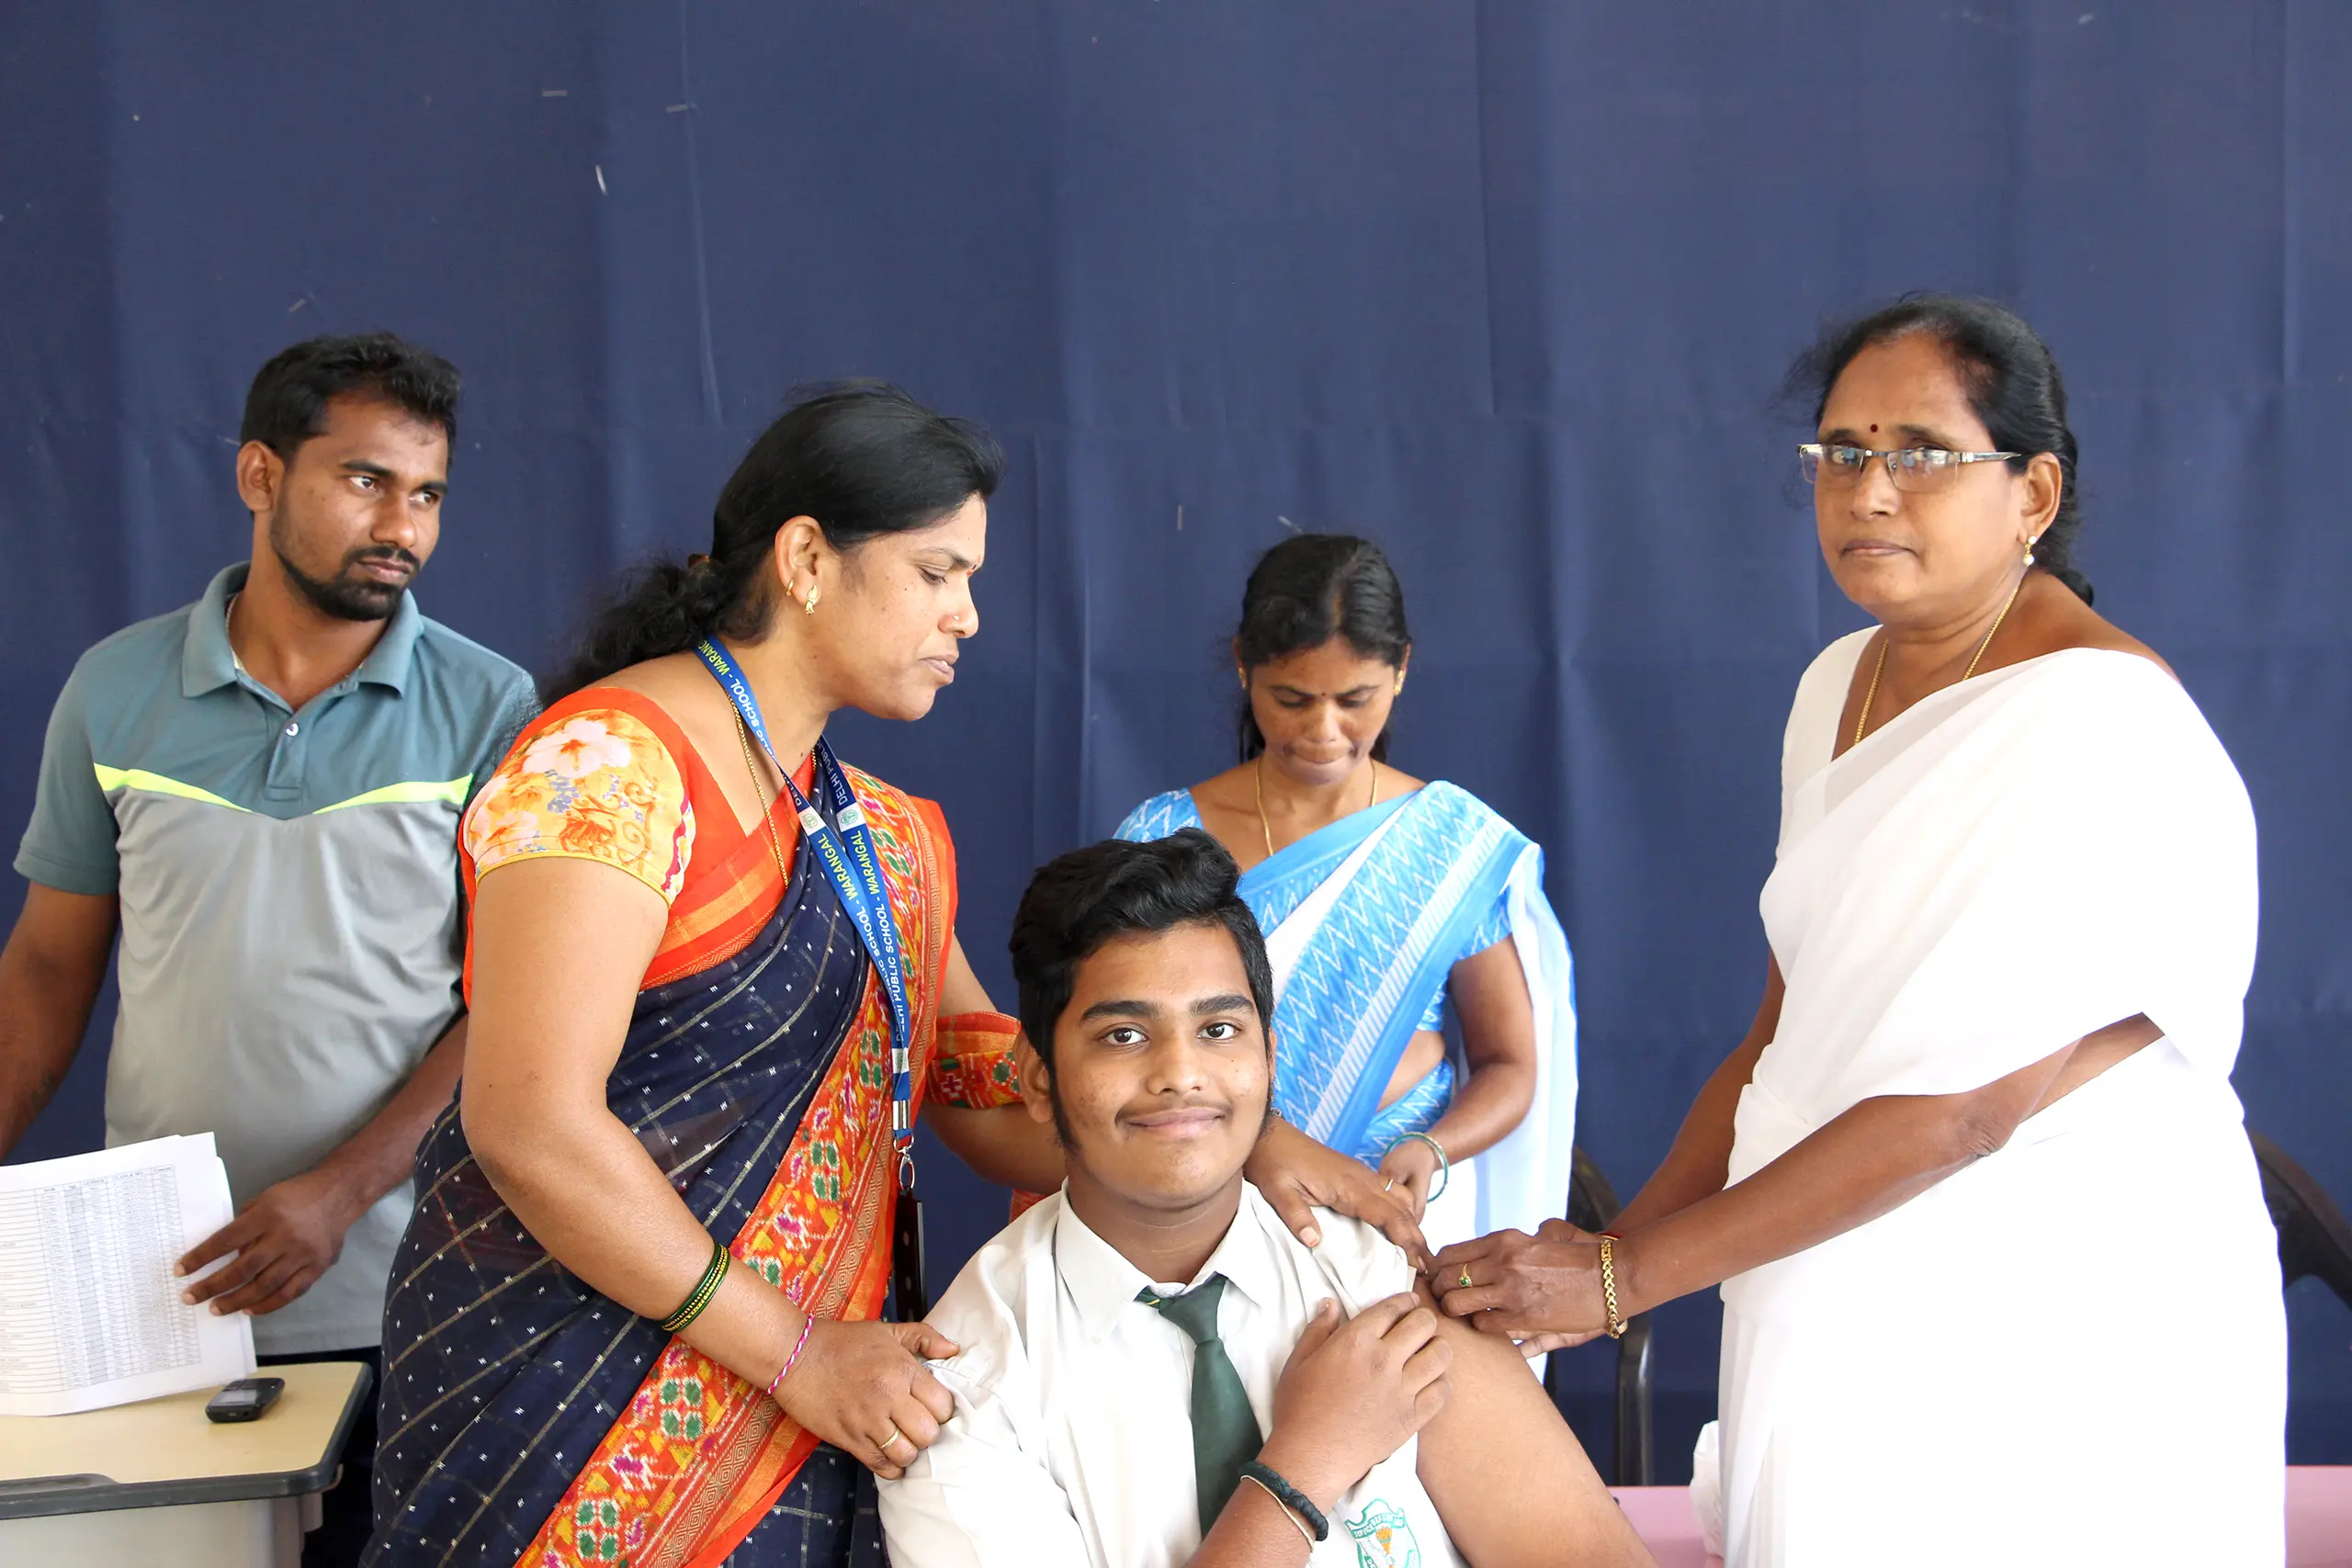 Student of DPS Warangal getting vaccinated during TD Vaccination drive in the presence of teachers and other students.